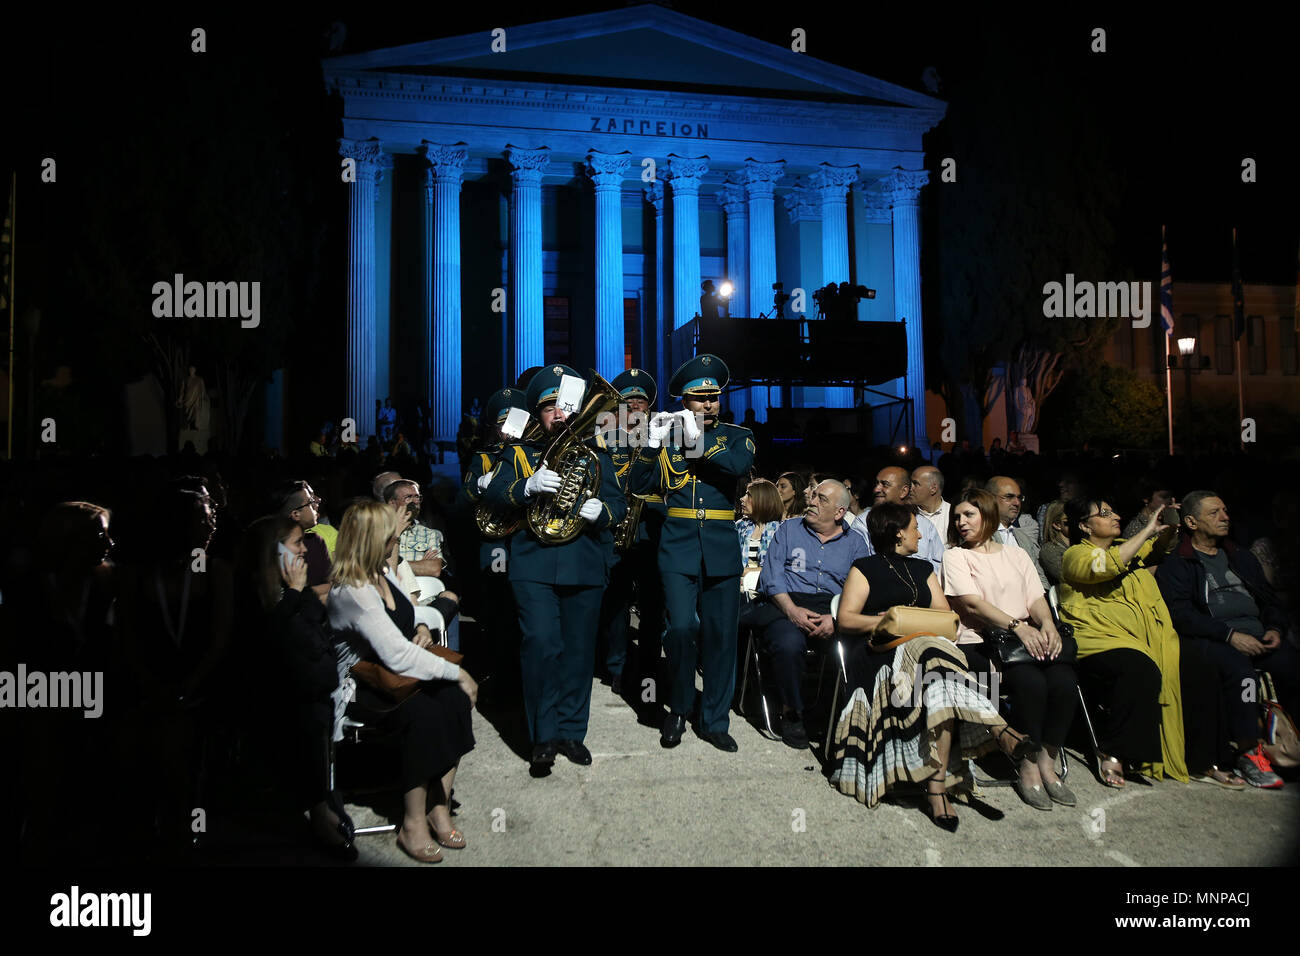 Athens, Greece. 18th May, 2018. Italian Band perform during the Athens Military Music Festival at Zappeion in Athens, Greece, May 18, 2018. The Athens Military Music Festival brings two days of military orchestras, musicians, soloists and dancers from different corners of the globe. Credit: Marios Lolos/Xinhua/Alamy Live News Stock Photo